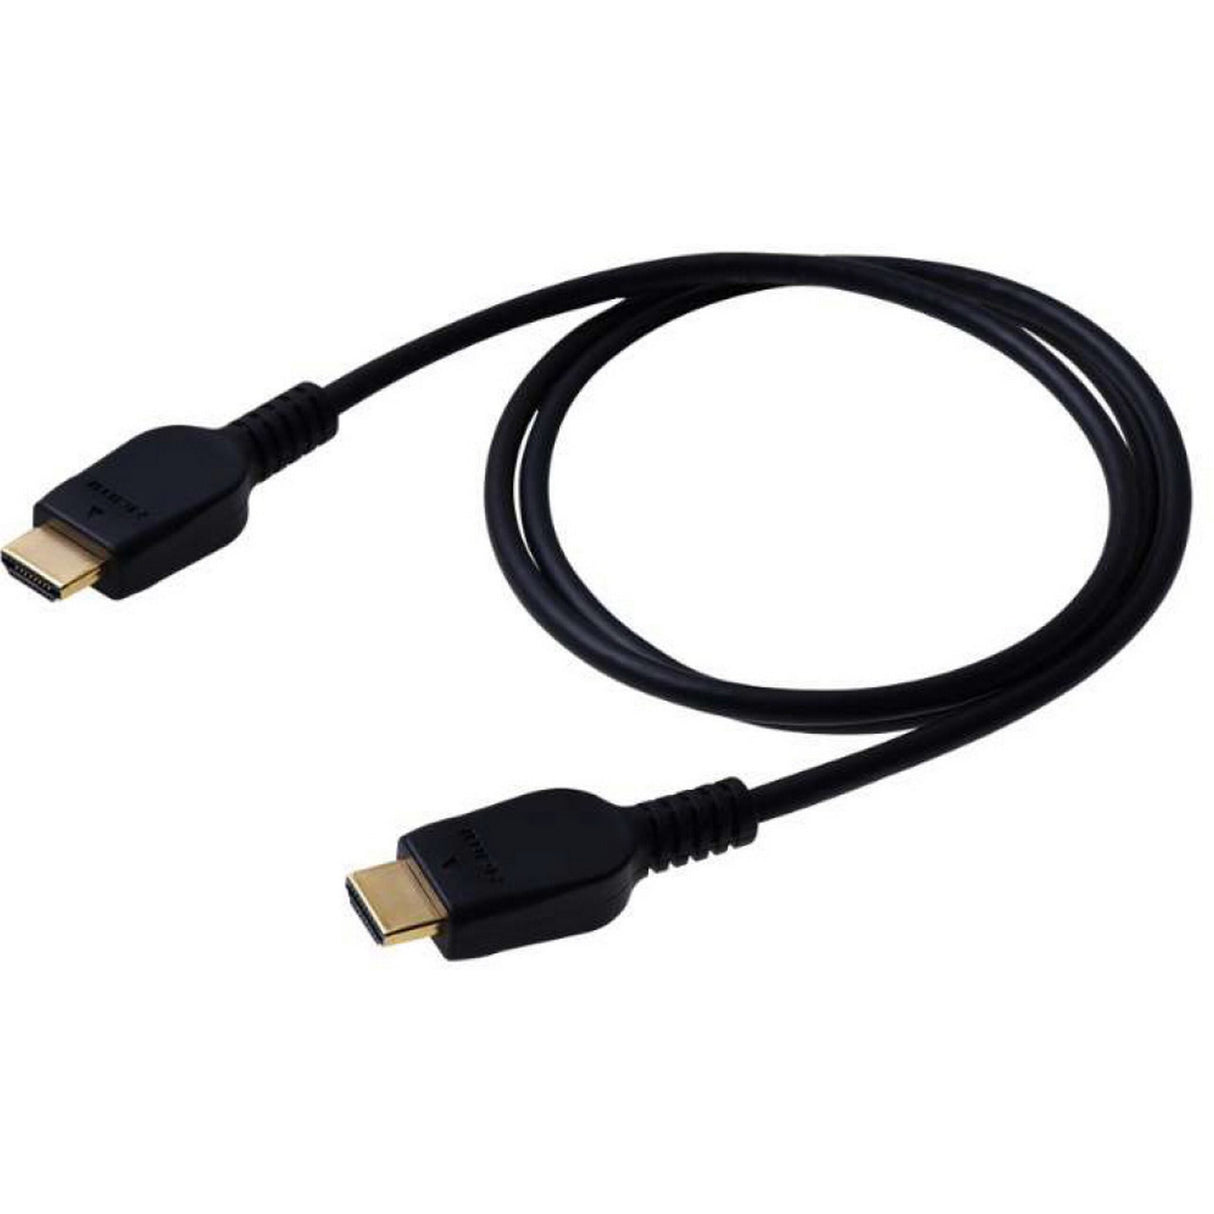 Connectronics Ultra High Speed HDMI 2.1 Cable for 4K/8K, 2 Meter